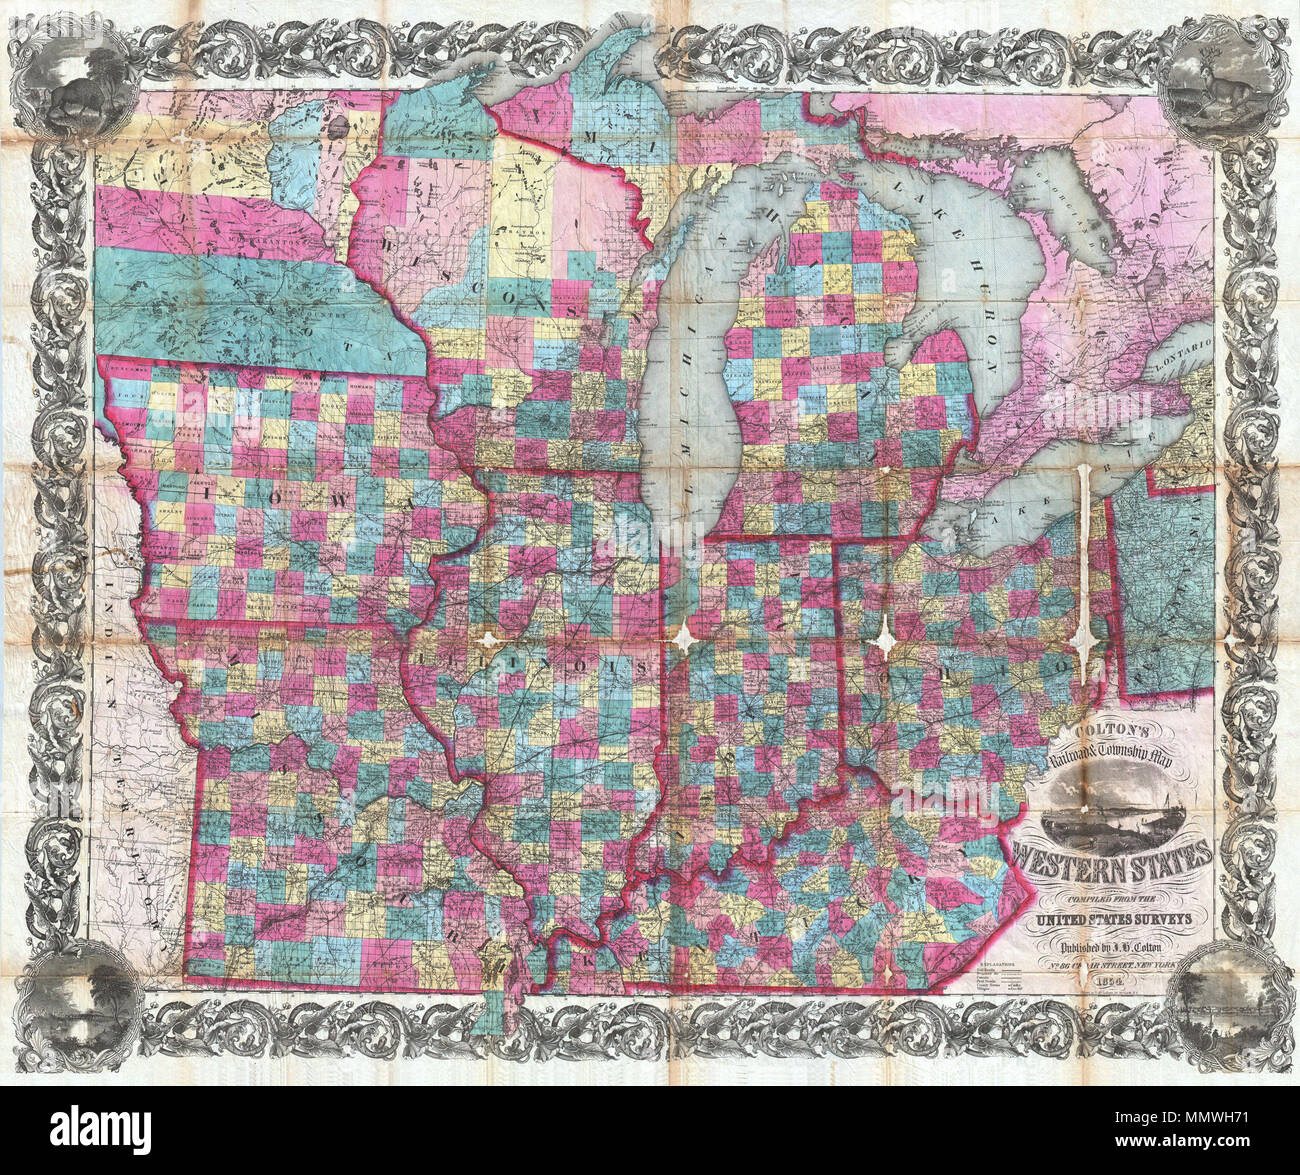 .  English: An extremely attractive example of Colton’s 1854 pocket map format railroad and township map of the Western States. Covers the states of Ohio, Kentucky, Illinois, Indiana, Missouri Iowa Michigan and Wisconsin with parts of Minnesota and Pennsylvania. Offers extraordinary detail with color coding to the county level. The eastern and southern parts of the map are well developed, but the northern and western territories, particularly northern Michigan, the Indian Territory, and Minnesota remain largely undeveloped. Notates railroads, towns, rivers, canals, geographical features and ro Stock Photo